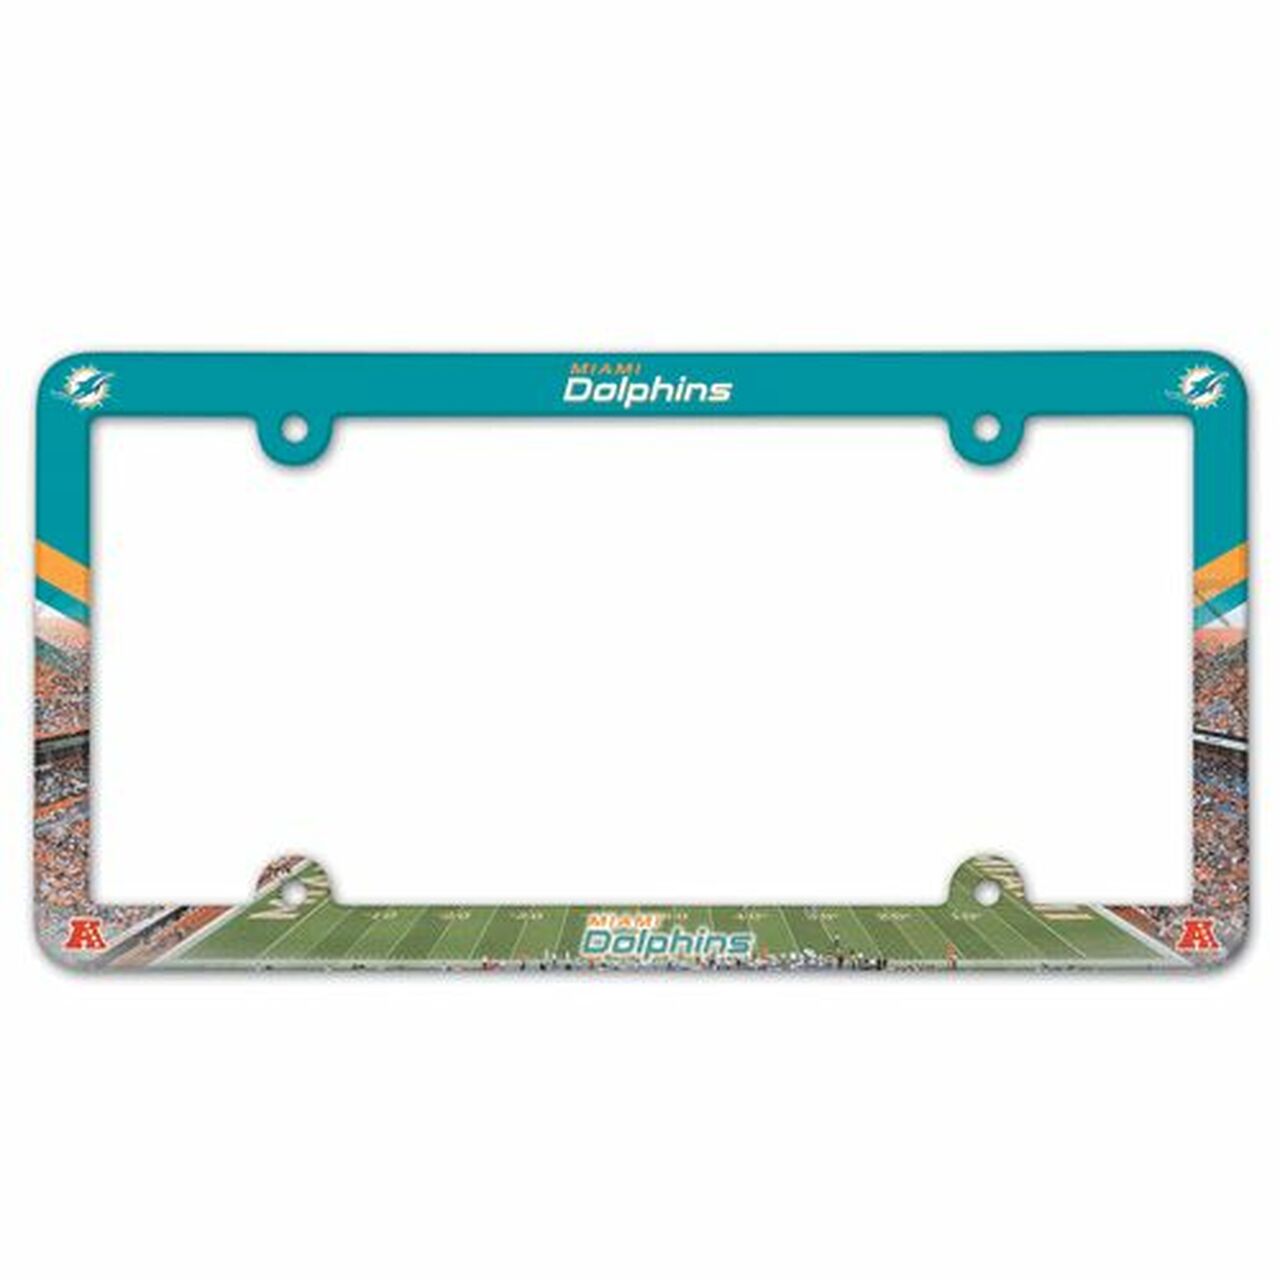 Miami Dolphins Full Color Plastic License Plate Frame by Wincraft